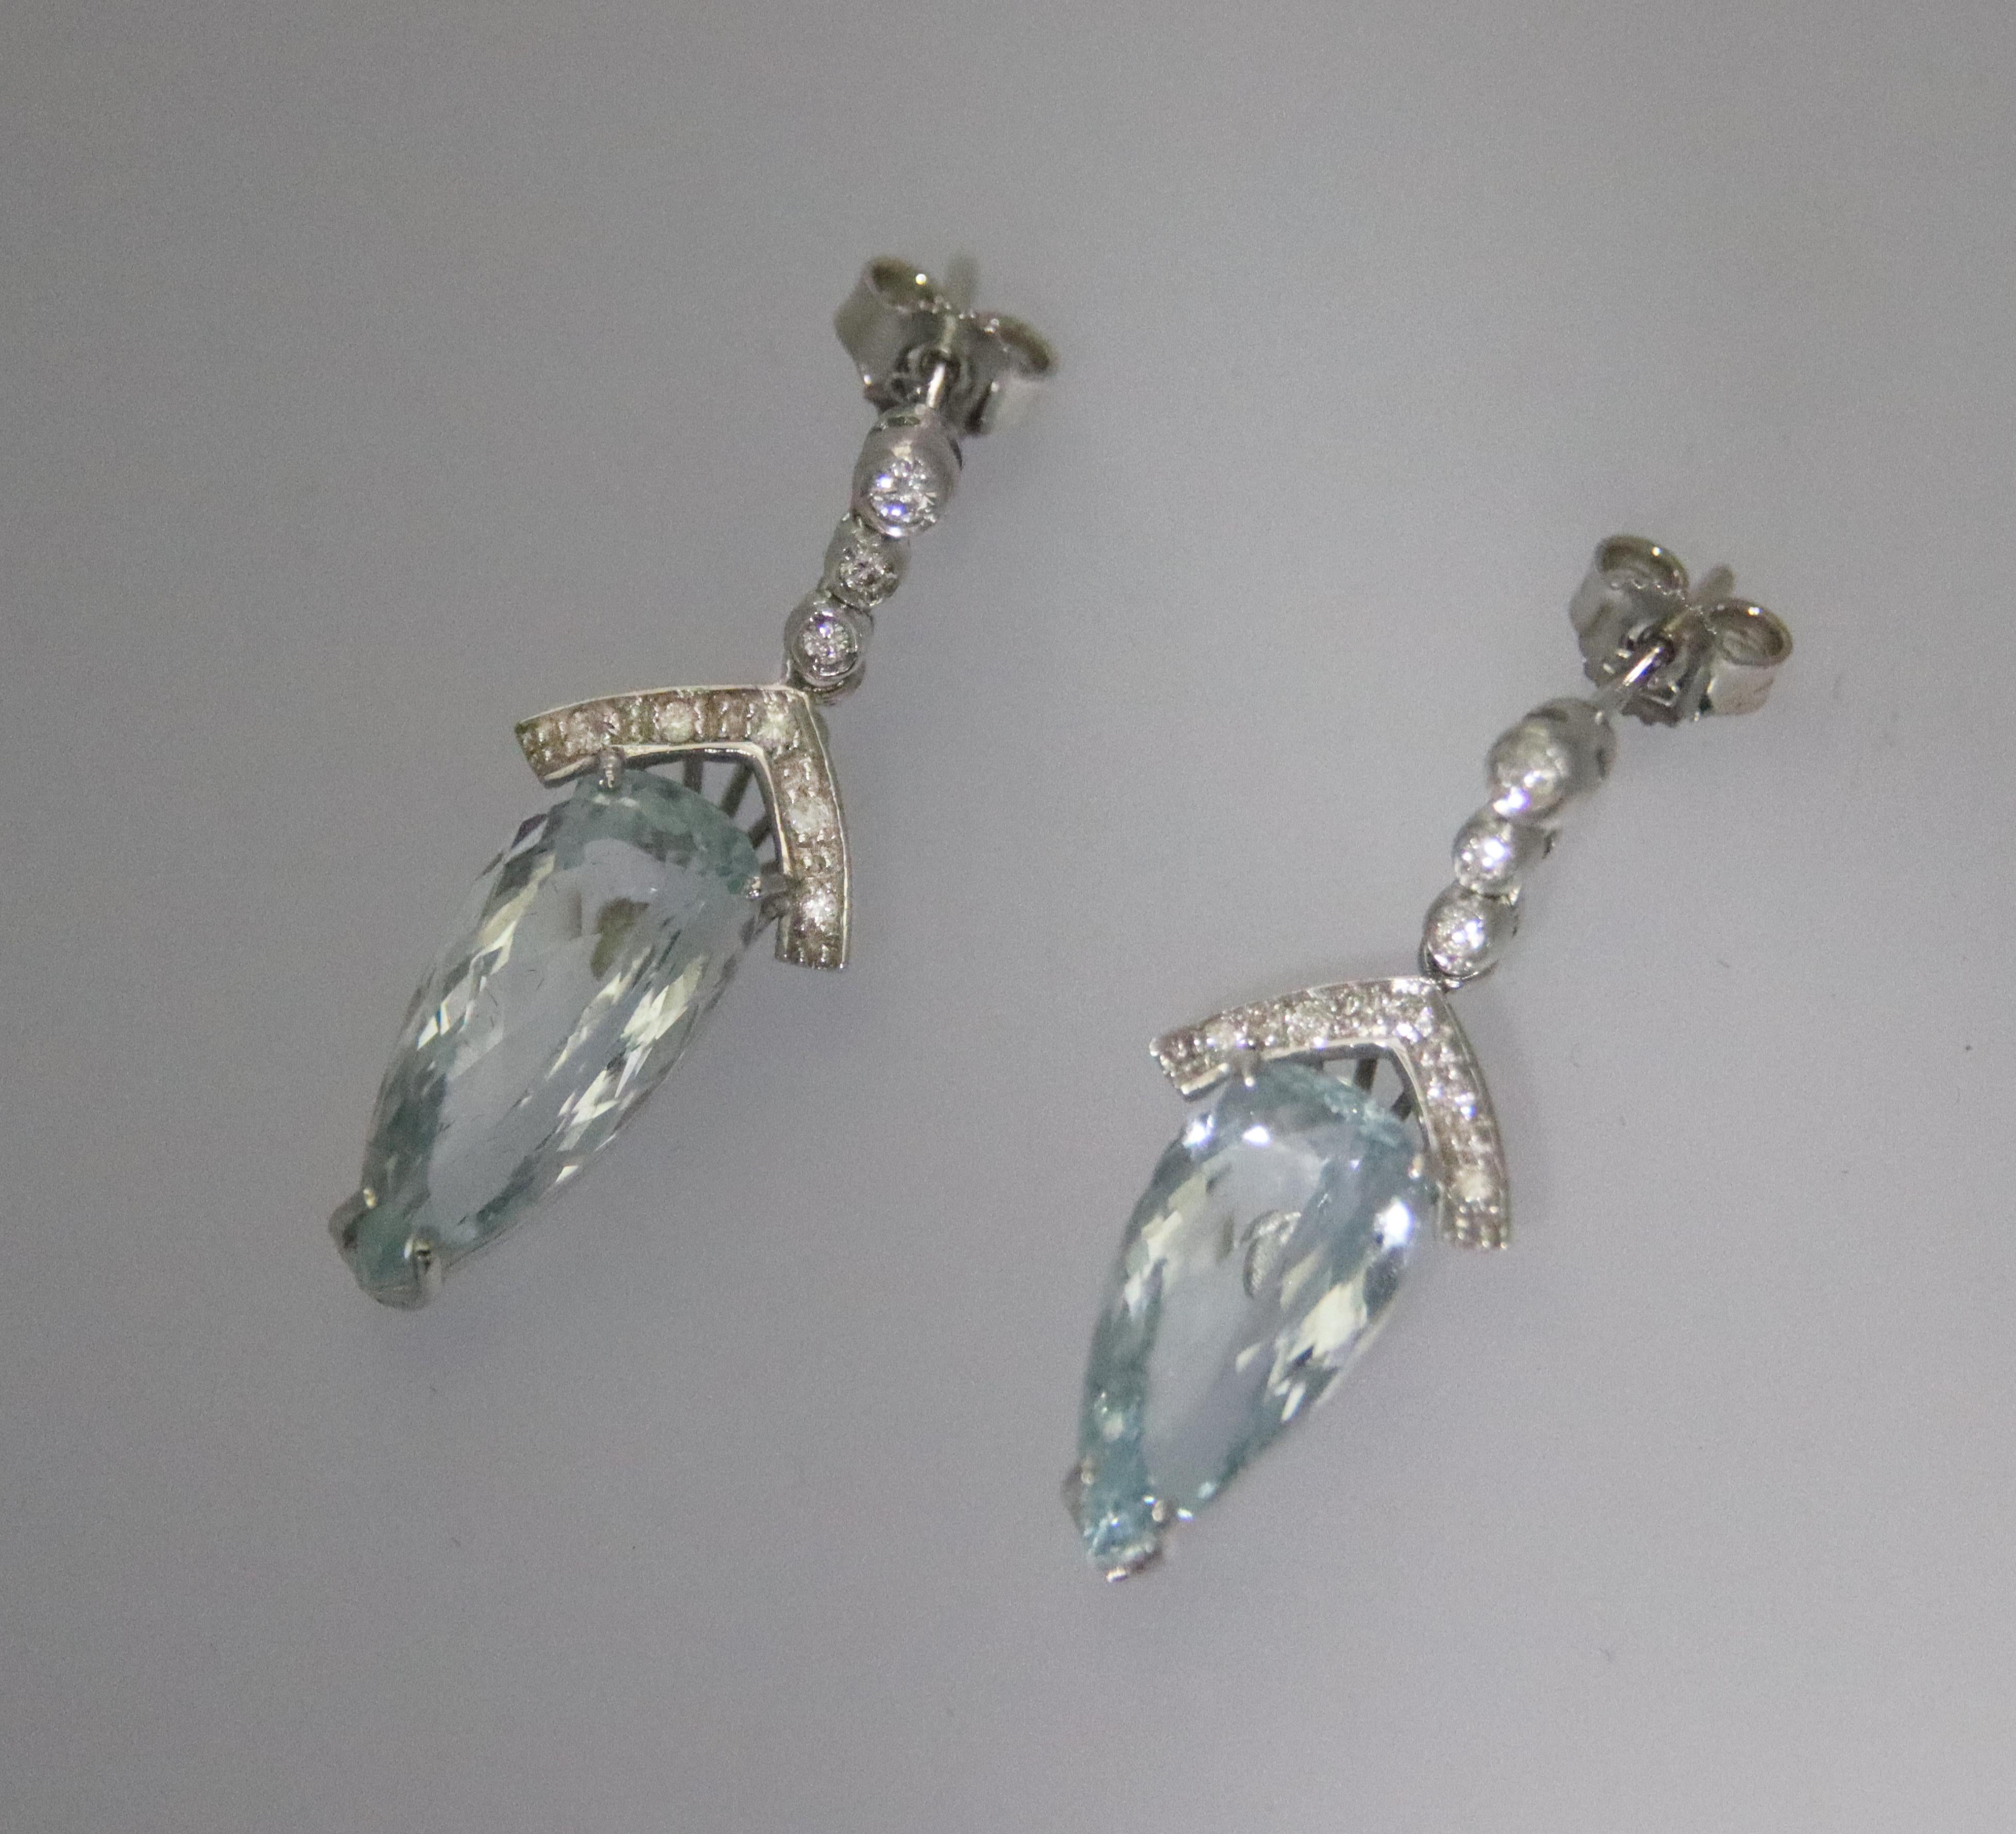 For any problems related to some materials contained in the items that do not allow shipping and require specific documents that require a particular period, please contact the seller with a private message to solve the problem.

Delightful earring